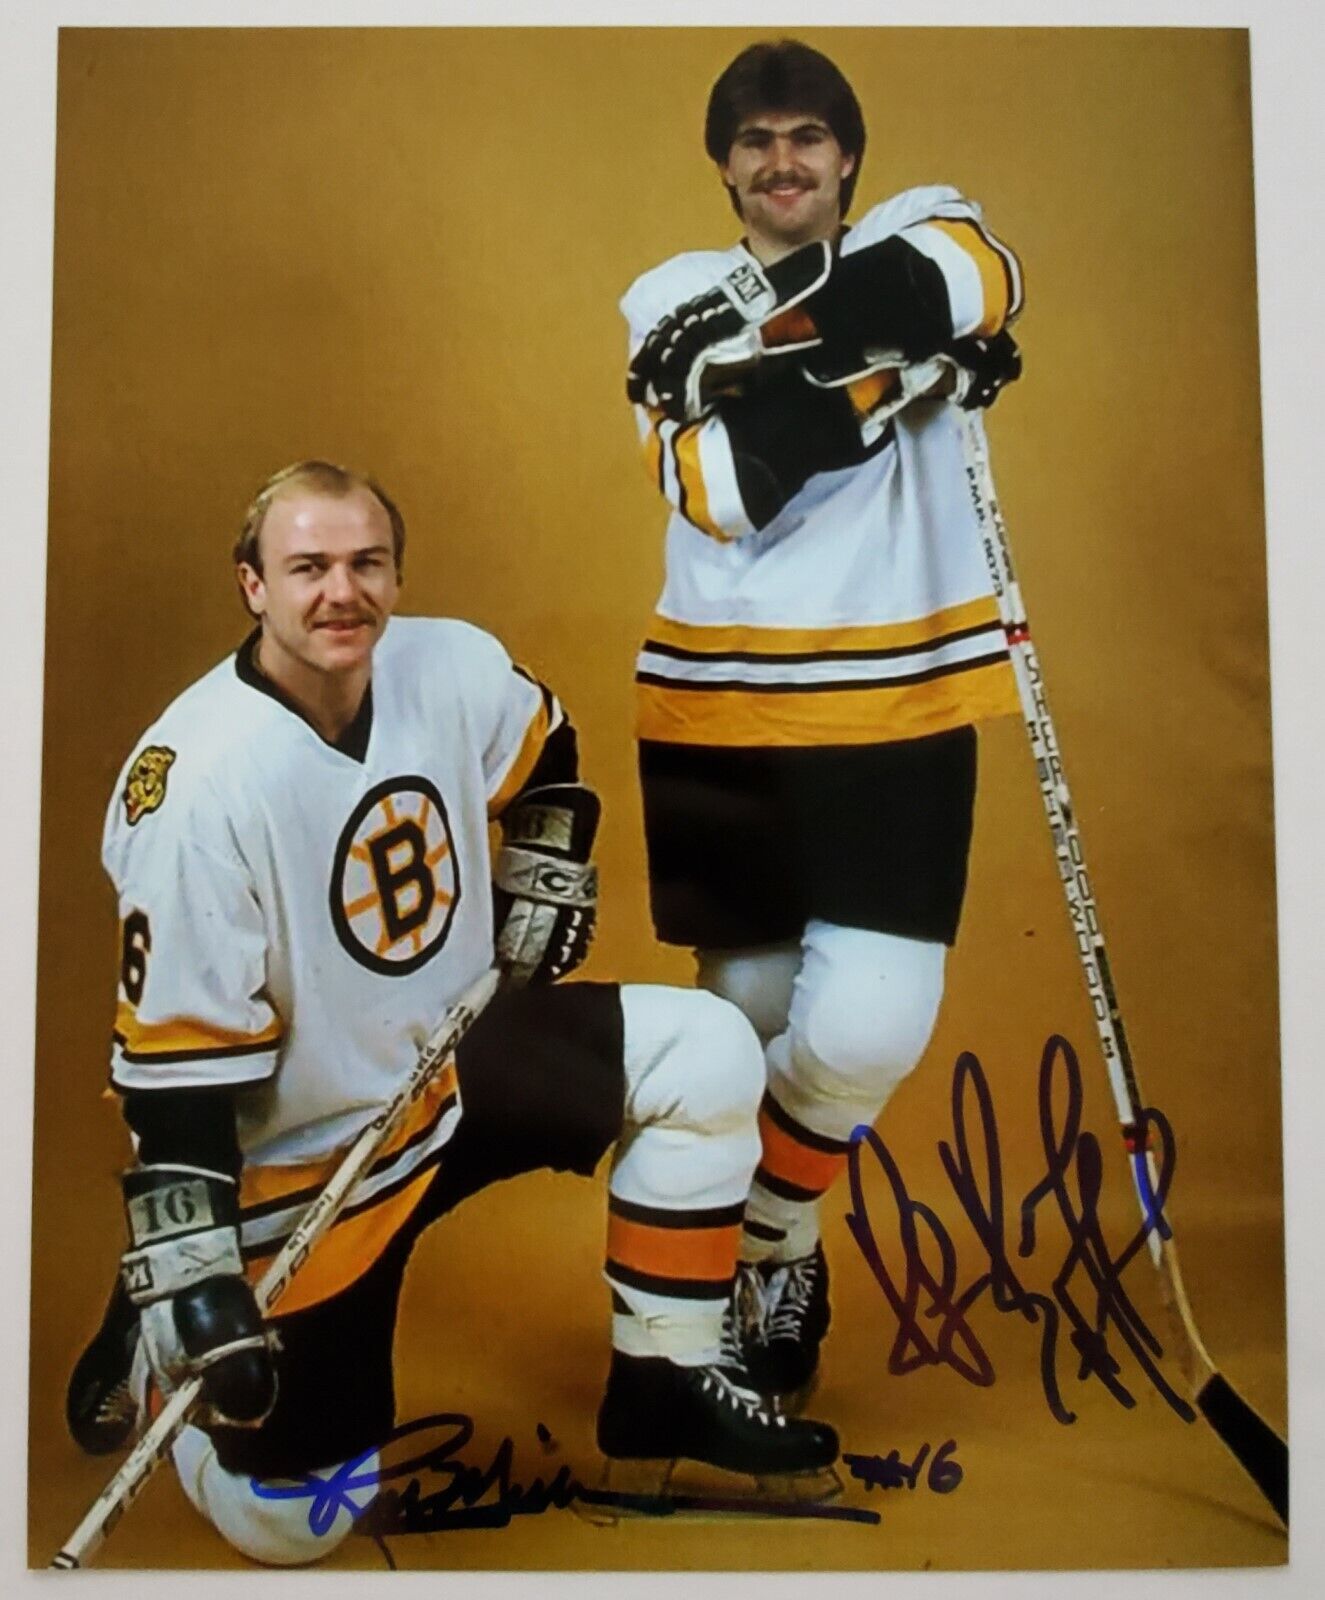 Ray Bourque & Rick Middleton Signed 8x10 Photo Poster painting Boston Bruins Hockey LEGENDS RAD